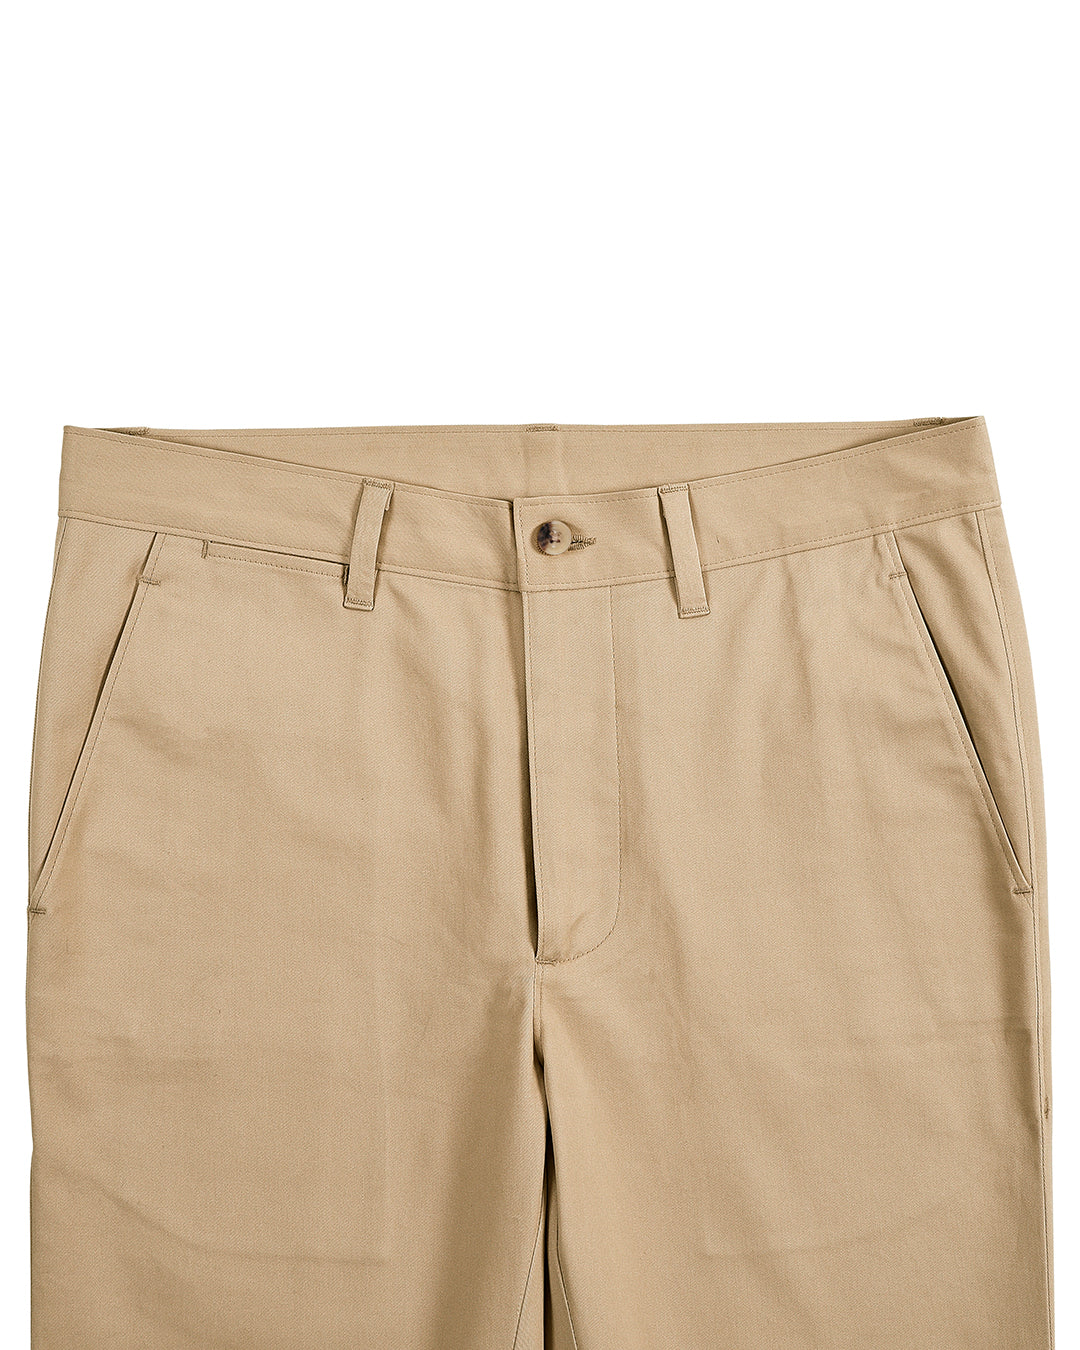 Front view of custom Genoa Chino pants for men by Luxire in beige